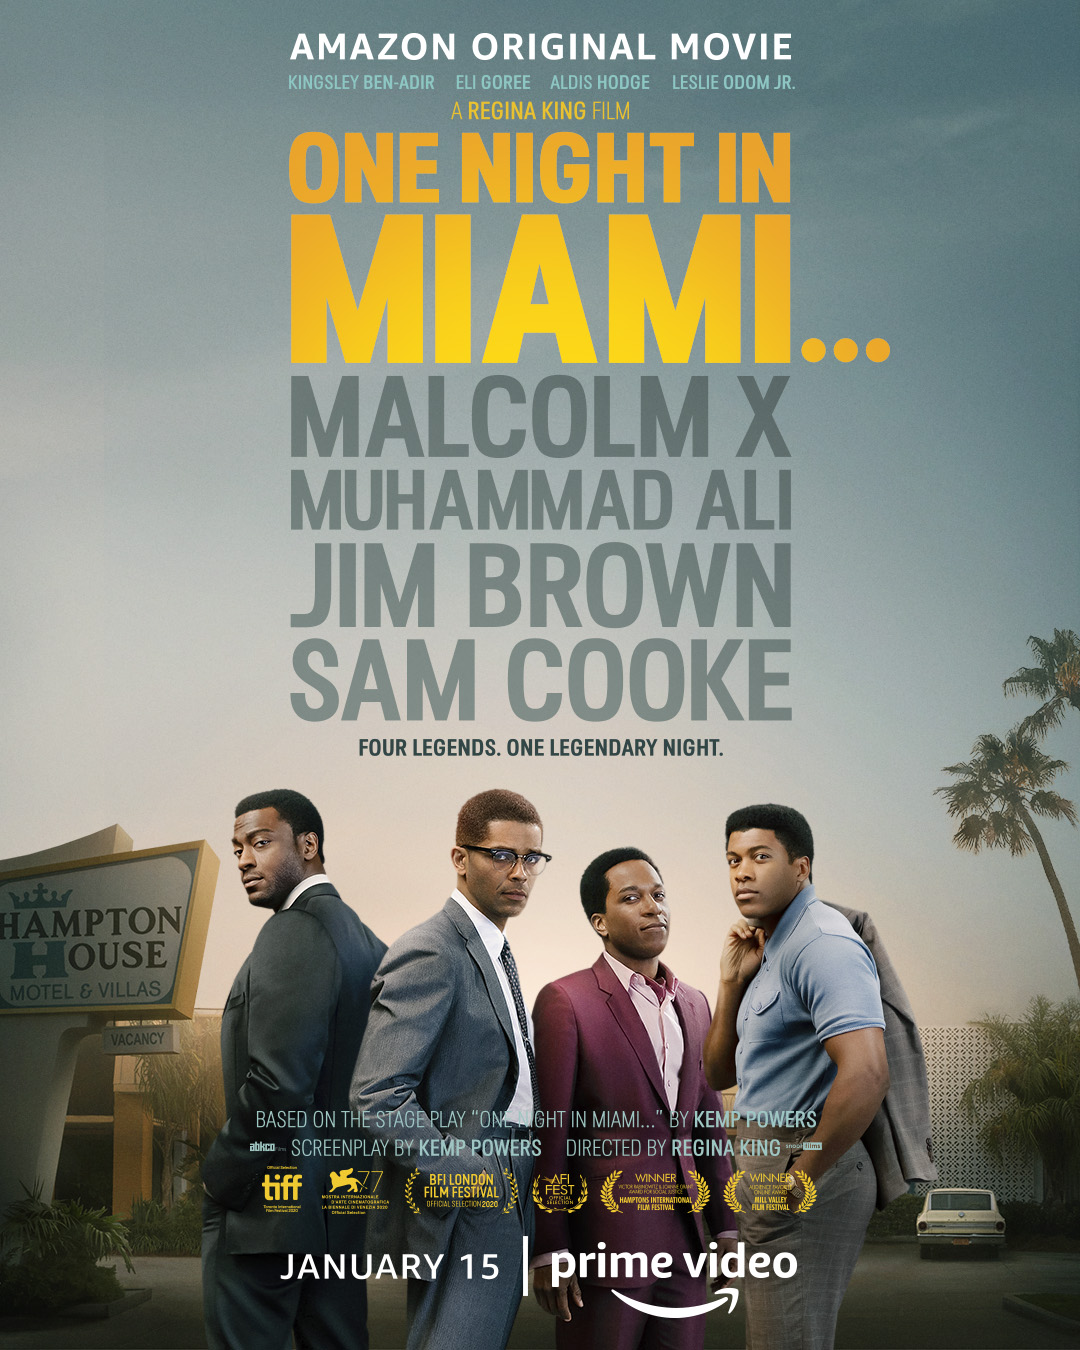 DC Readers: Attend A Free Virtual Screening Of ‘One Night In Miami’